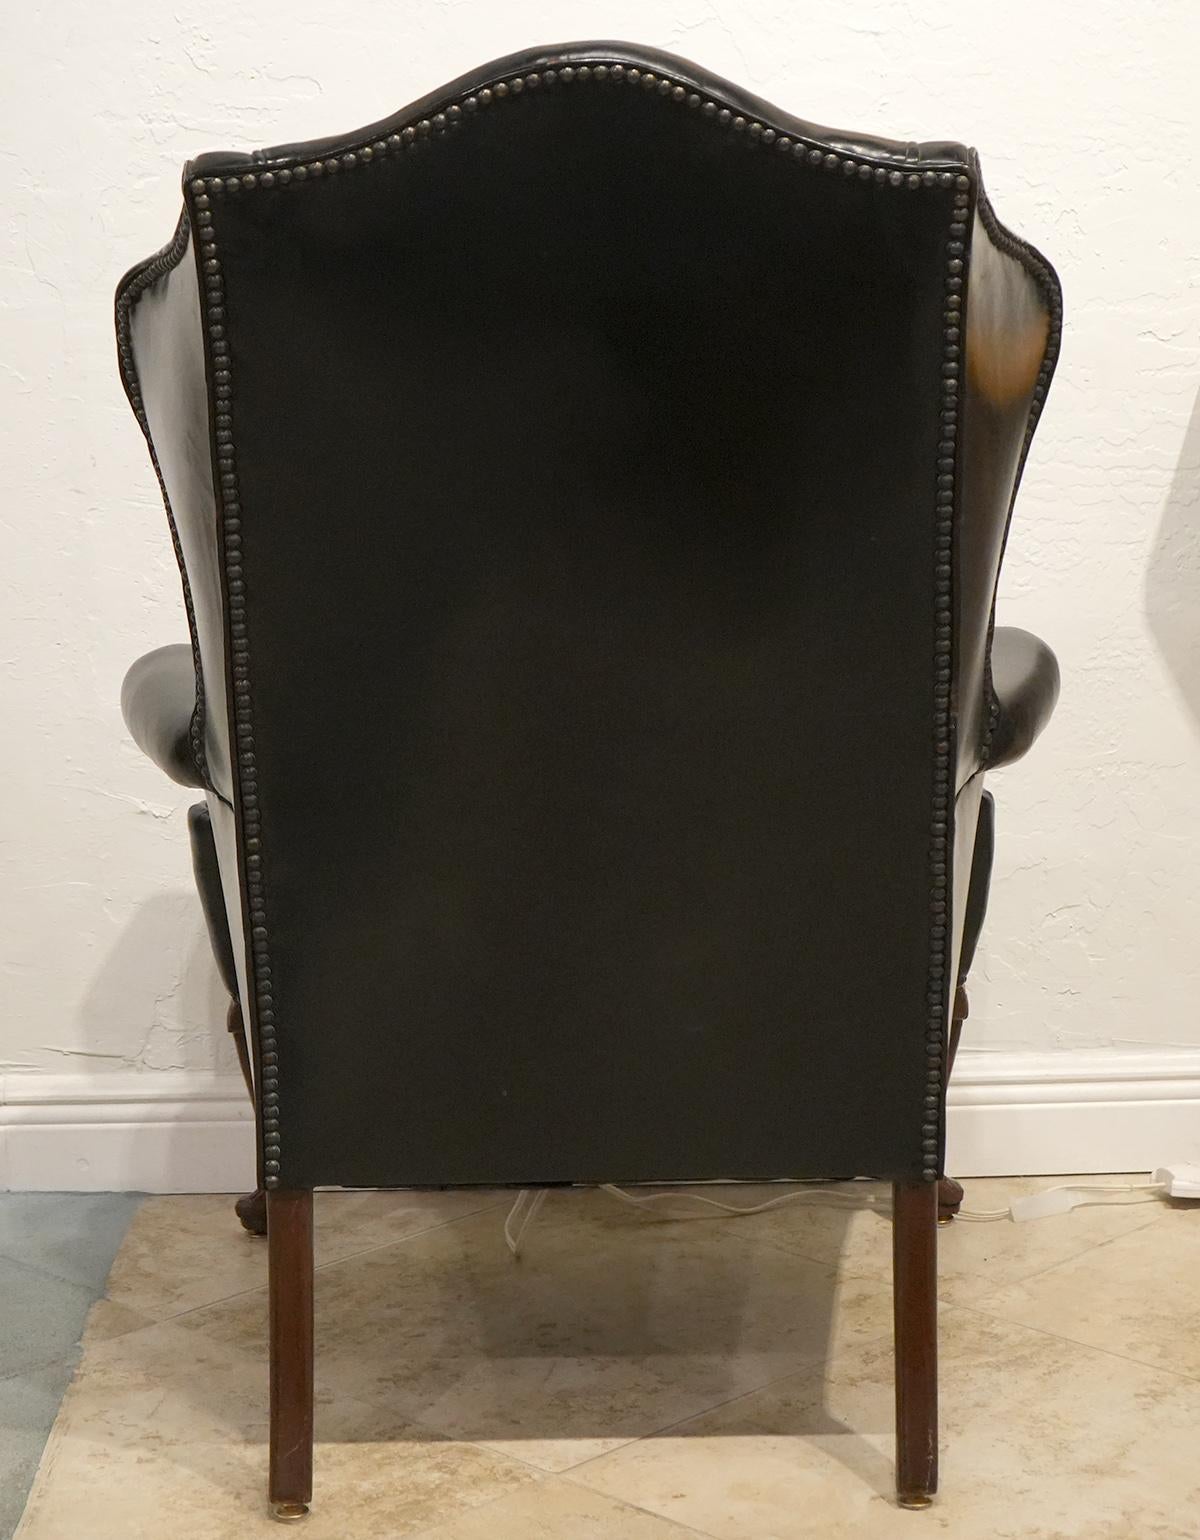 20th Century Vintage English Queen Anne Style Black Leather Rolled Arm Wing Back Chairs